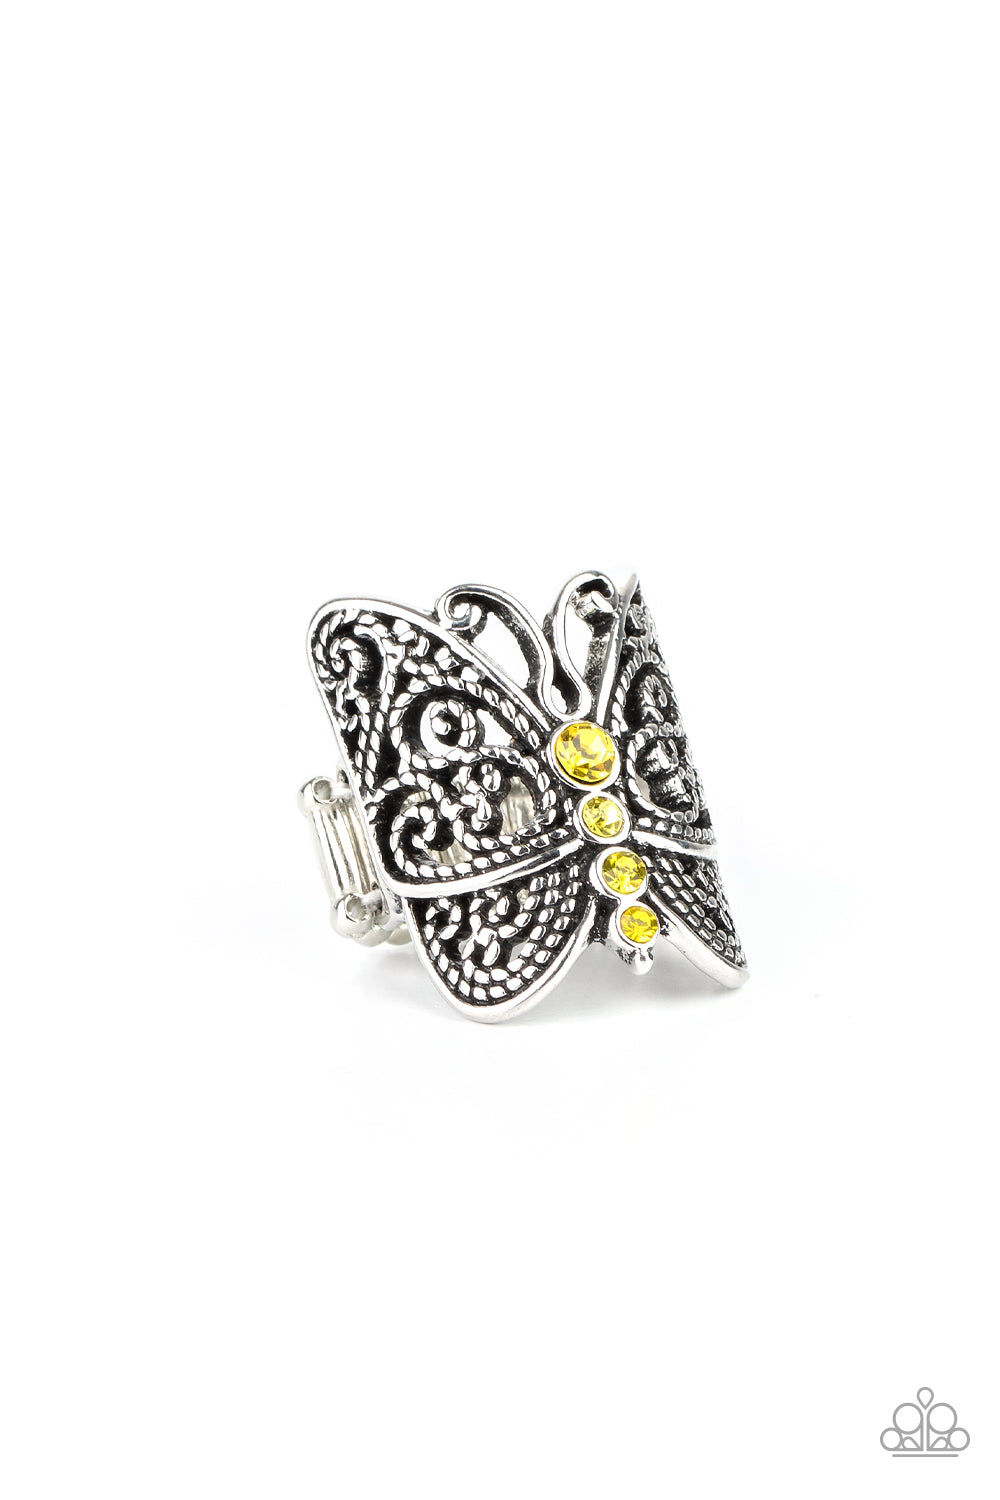 Butterfly Bling Yellow Ring - Paparazzi Accessories. A row of glittery Illuminating rhinestones adorns the center of a shiny silver butterfly featuring whimsically studded filigree wings. Features a stretchy band for a flexible fit.  ﻿All Paparazzi Accessories are lead free and nickel free!  Sold as one individual ring.